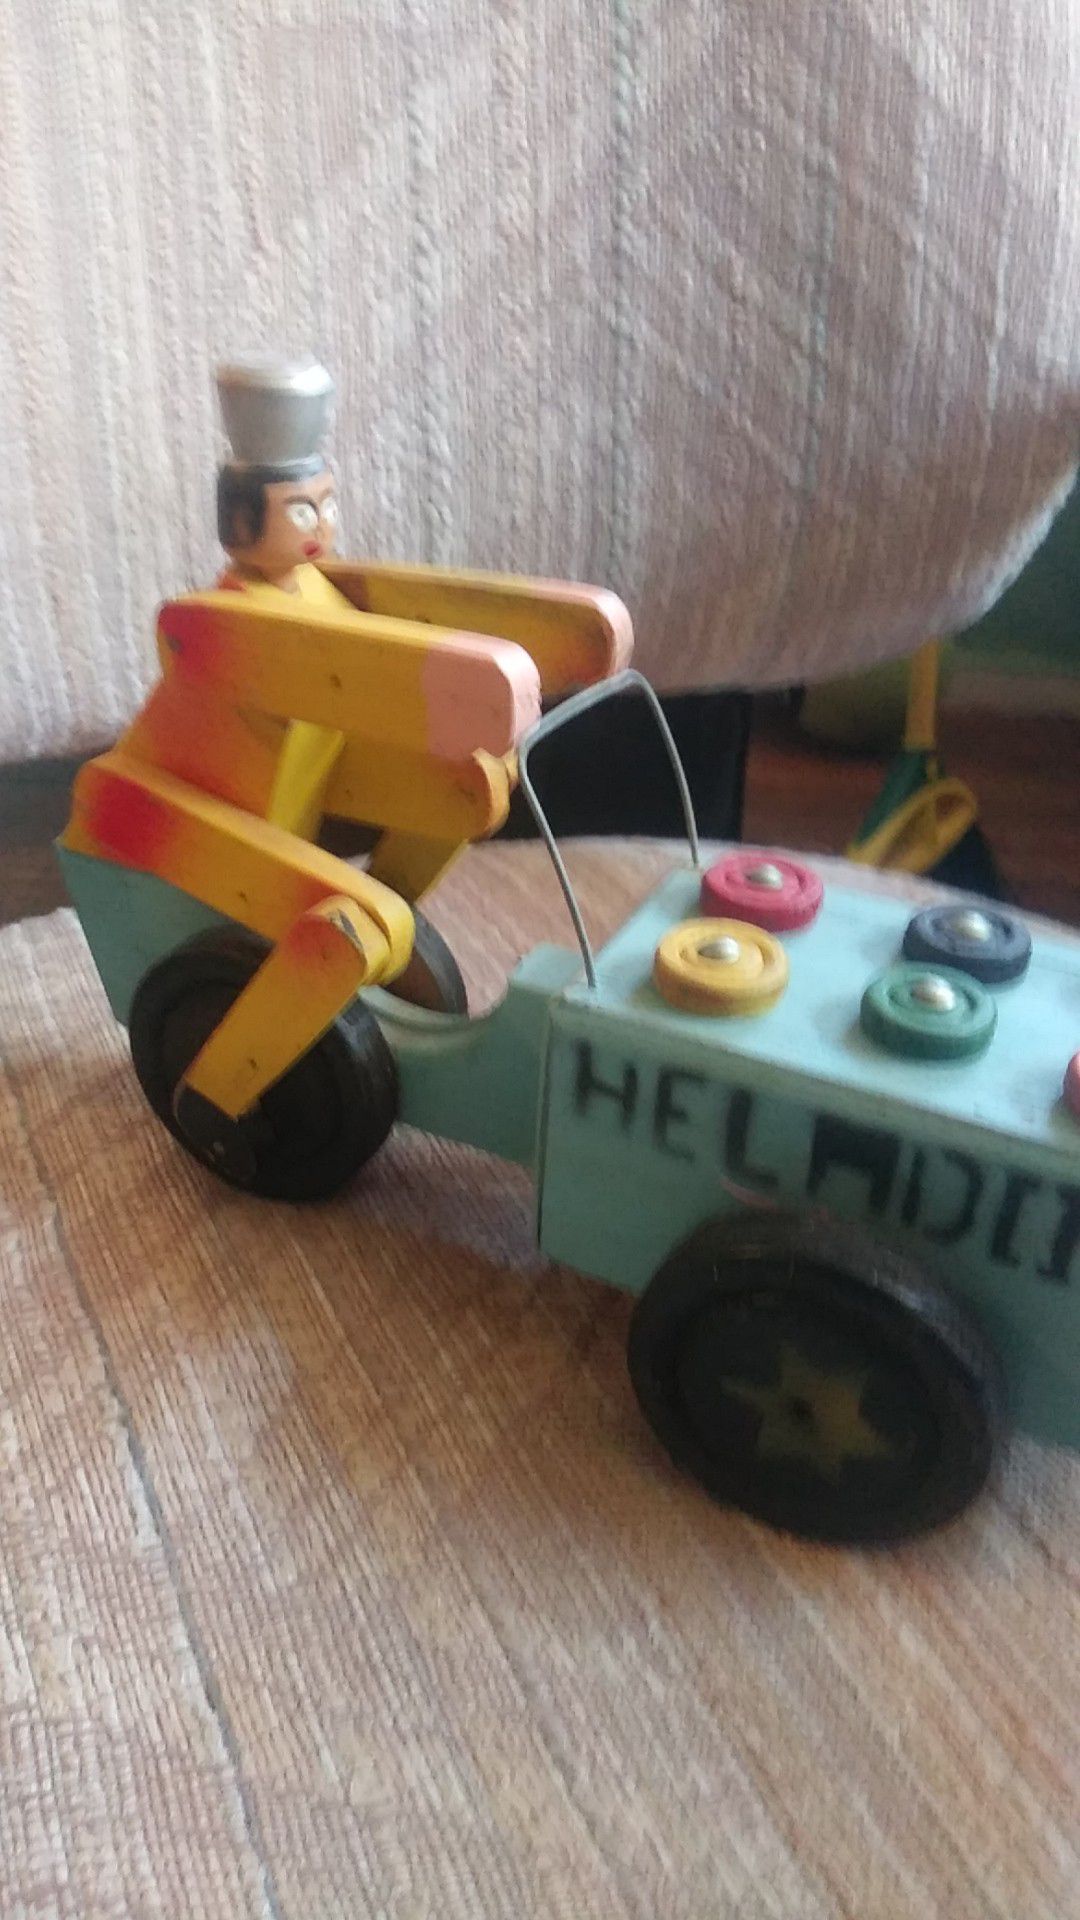 Old push toy